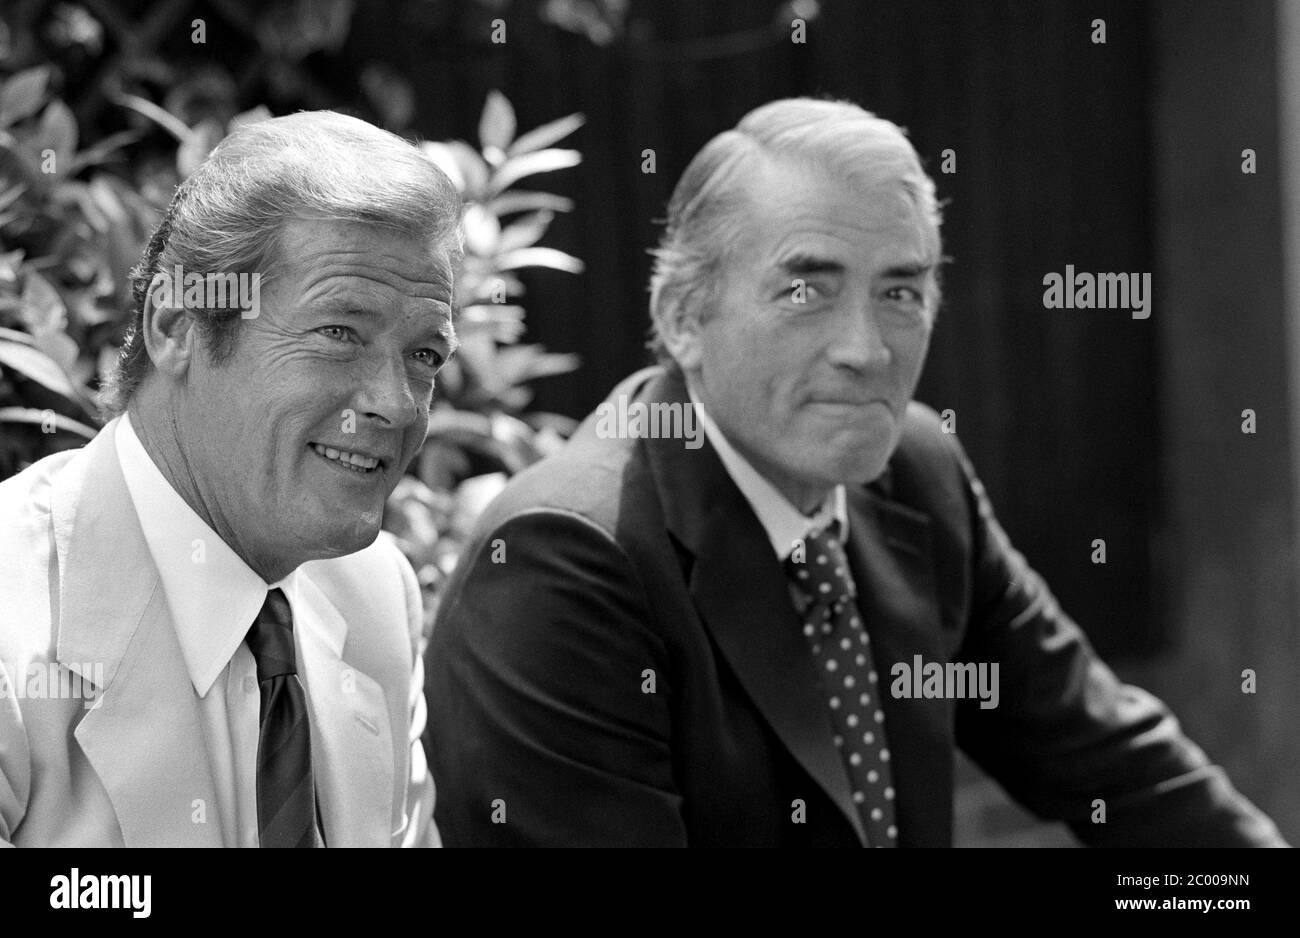 LONDON, UK. Aug 1980: Actors Roger Moore & Gregory Peck at photocall for 'Sea Wolves' at the Inn on the Park Hotel in London. © Paul Smith/Featureflash Stock Photo